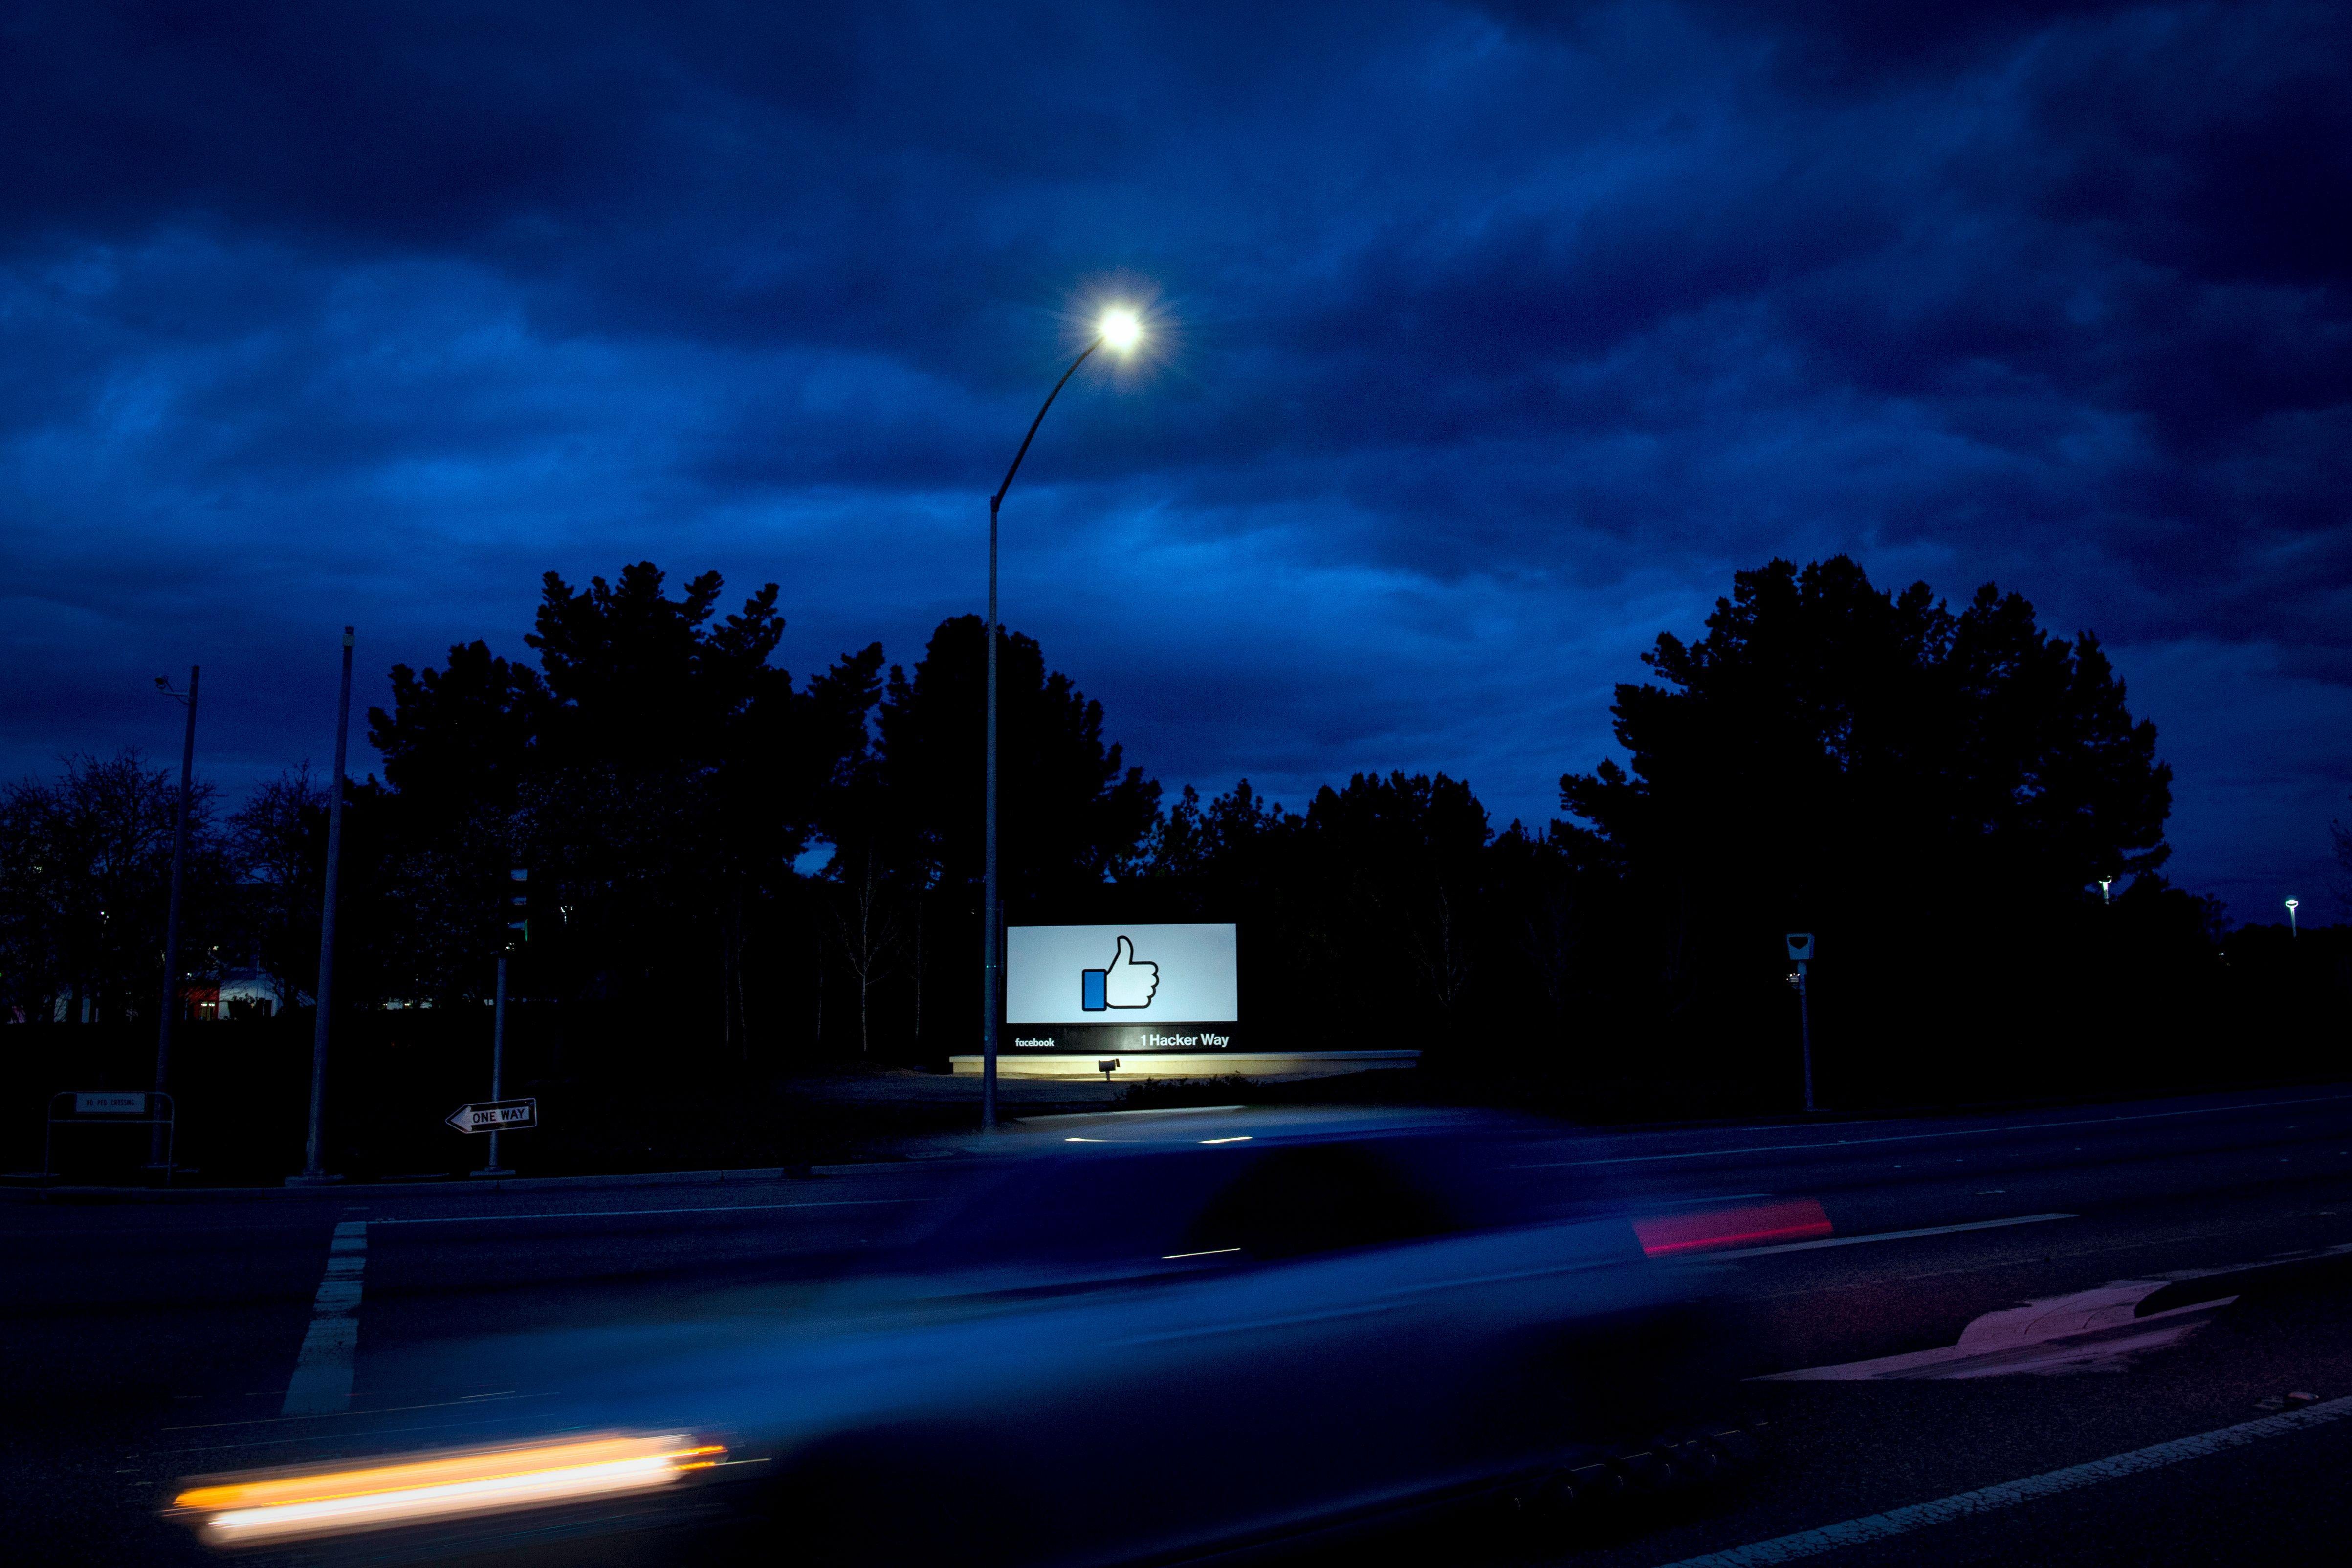 A Facebook billboard featuring the like button, by the side of a highway at night.